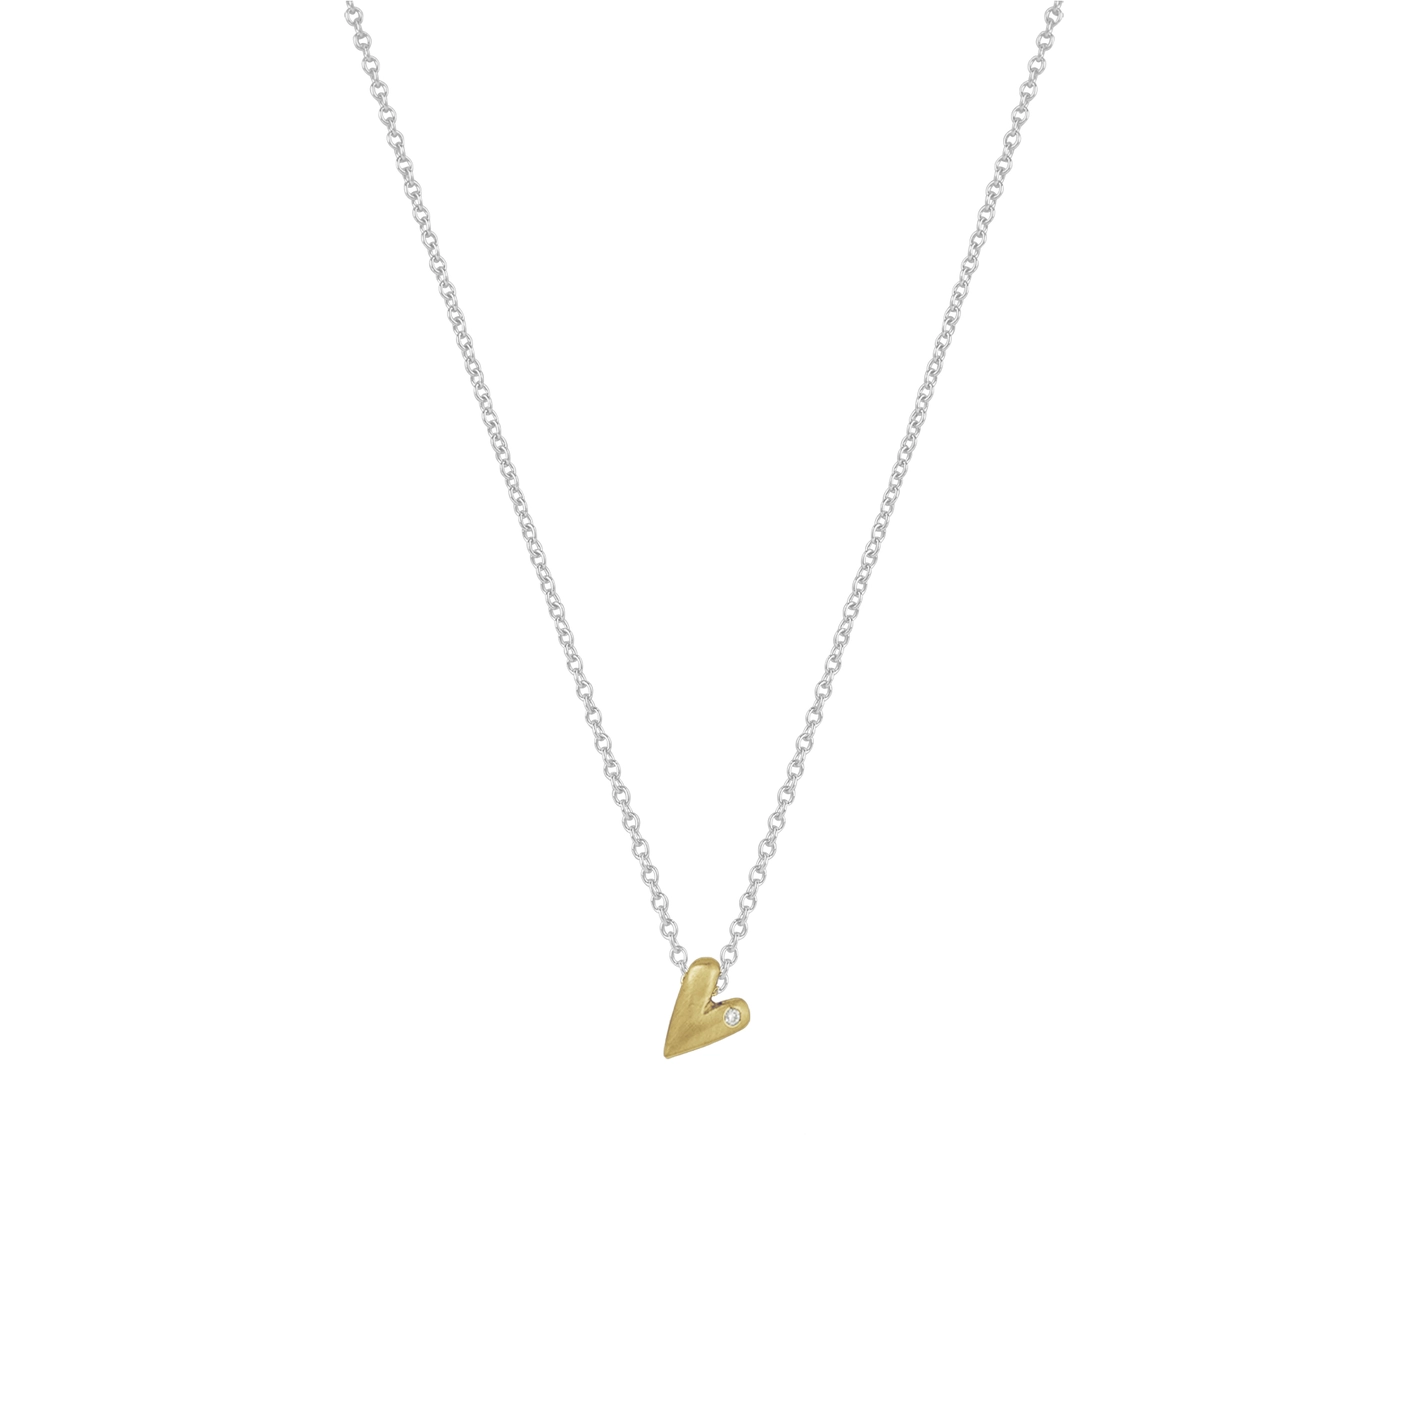 14k Gold Puffy Heart with Diamond Pendant Necklace on Silver Chain